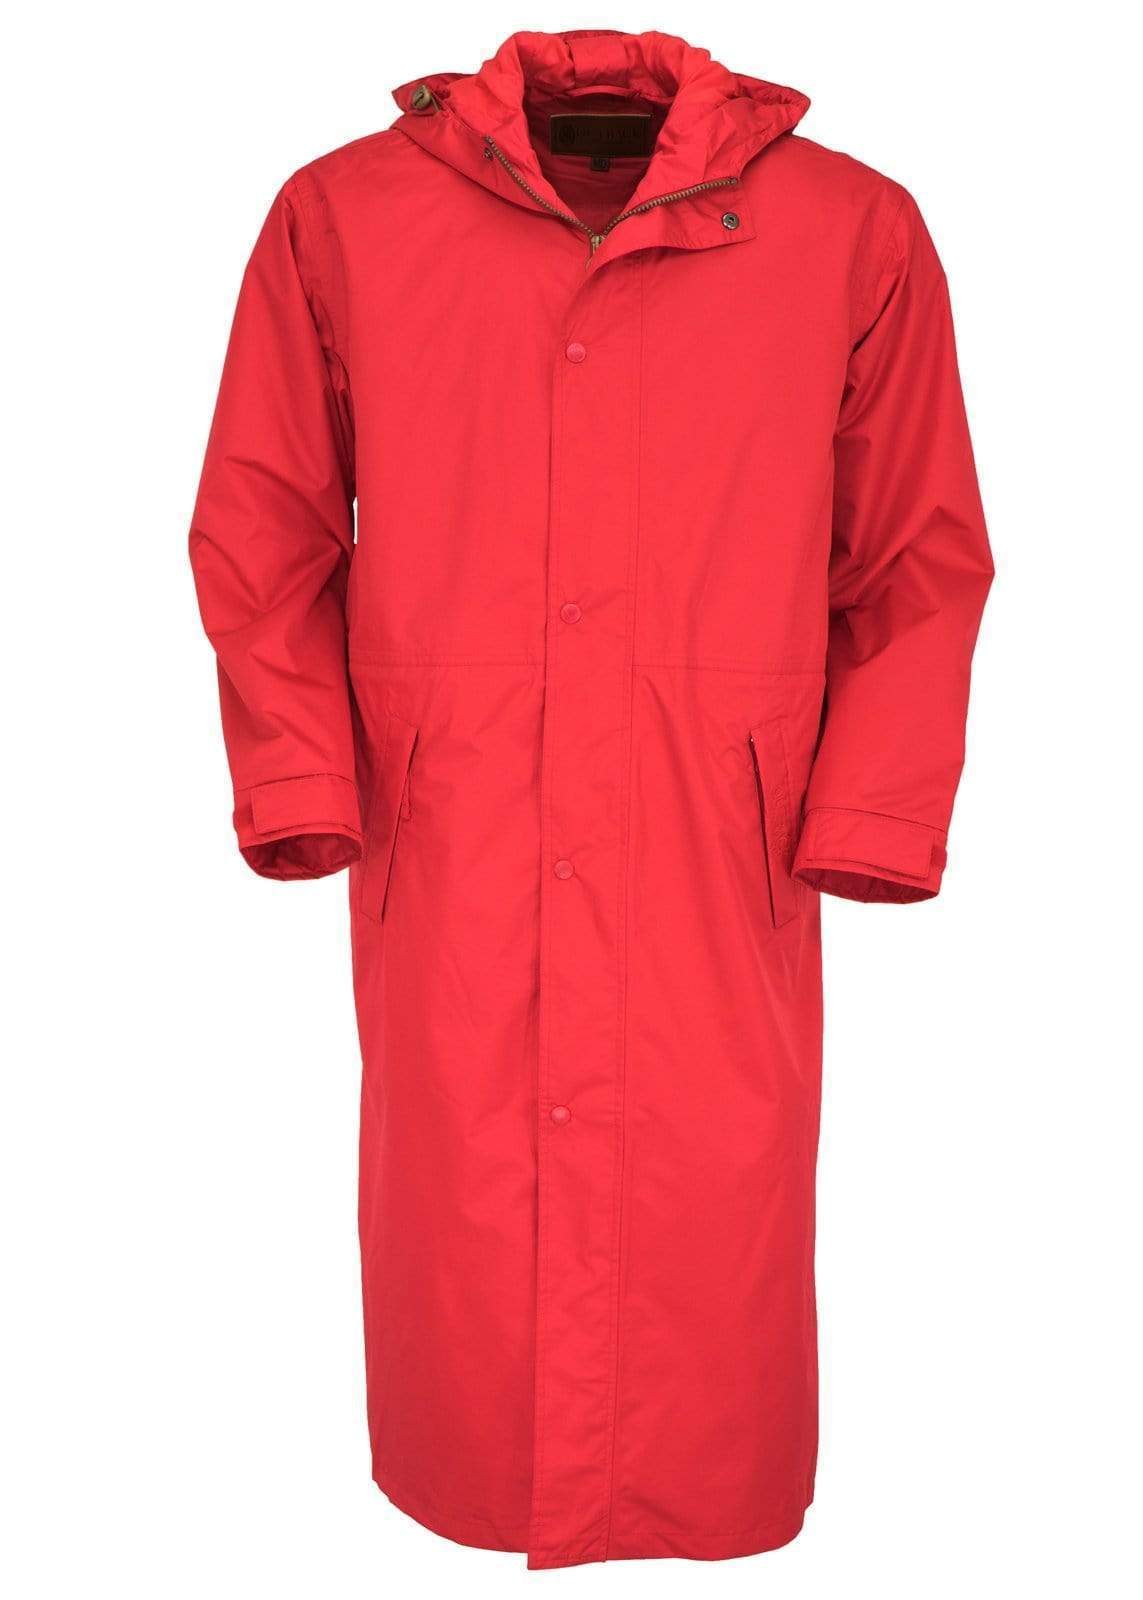 Outback Trading Company Pak-A-Roo Duster Red / XS 2406-RED-XS 789043043747 Duster Coats